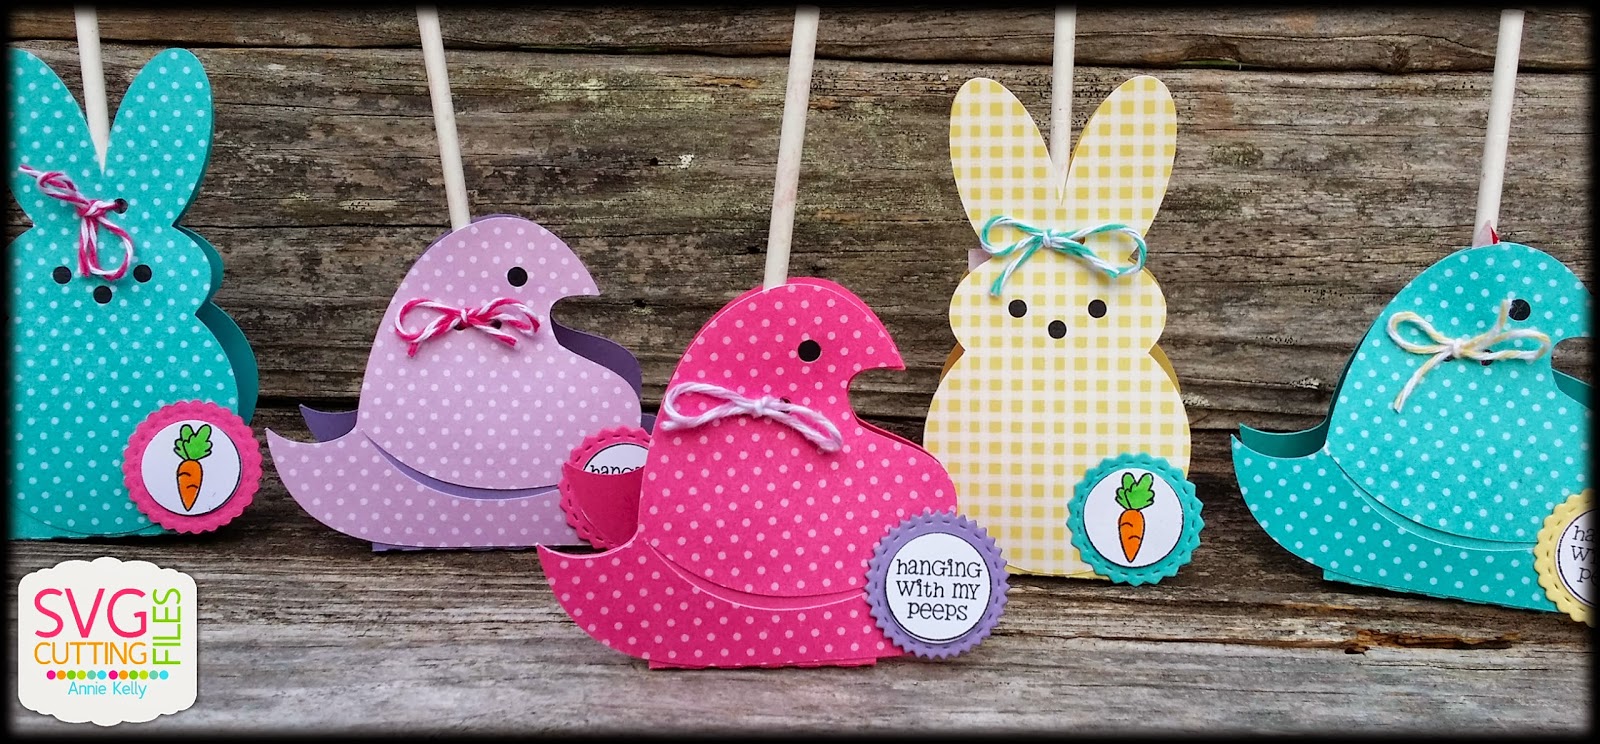 SVG Cutting Files: Spring Chick/Bunny Lollipop Covers!